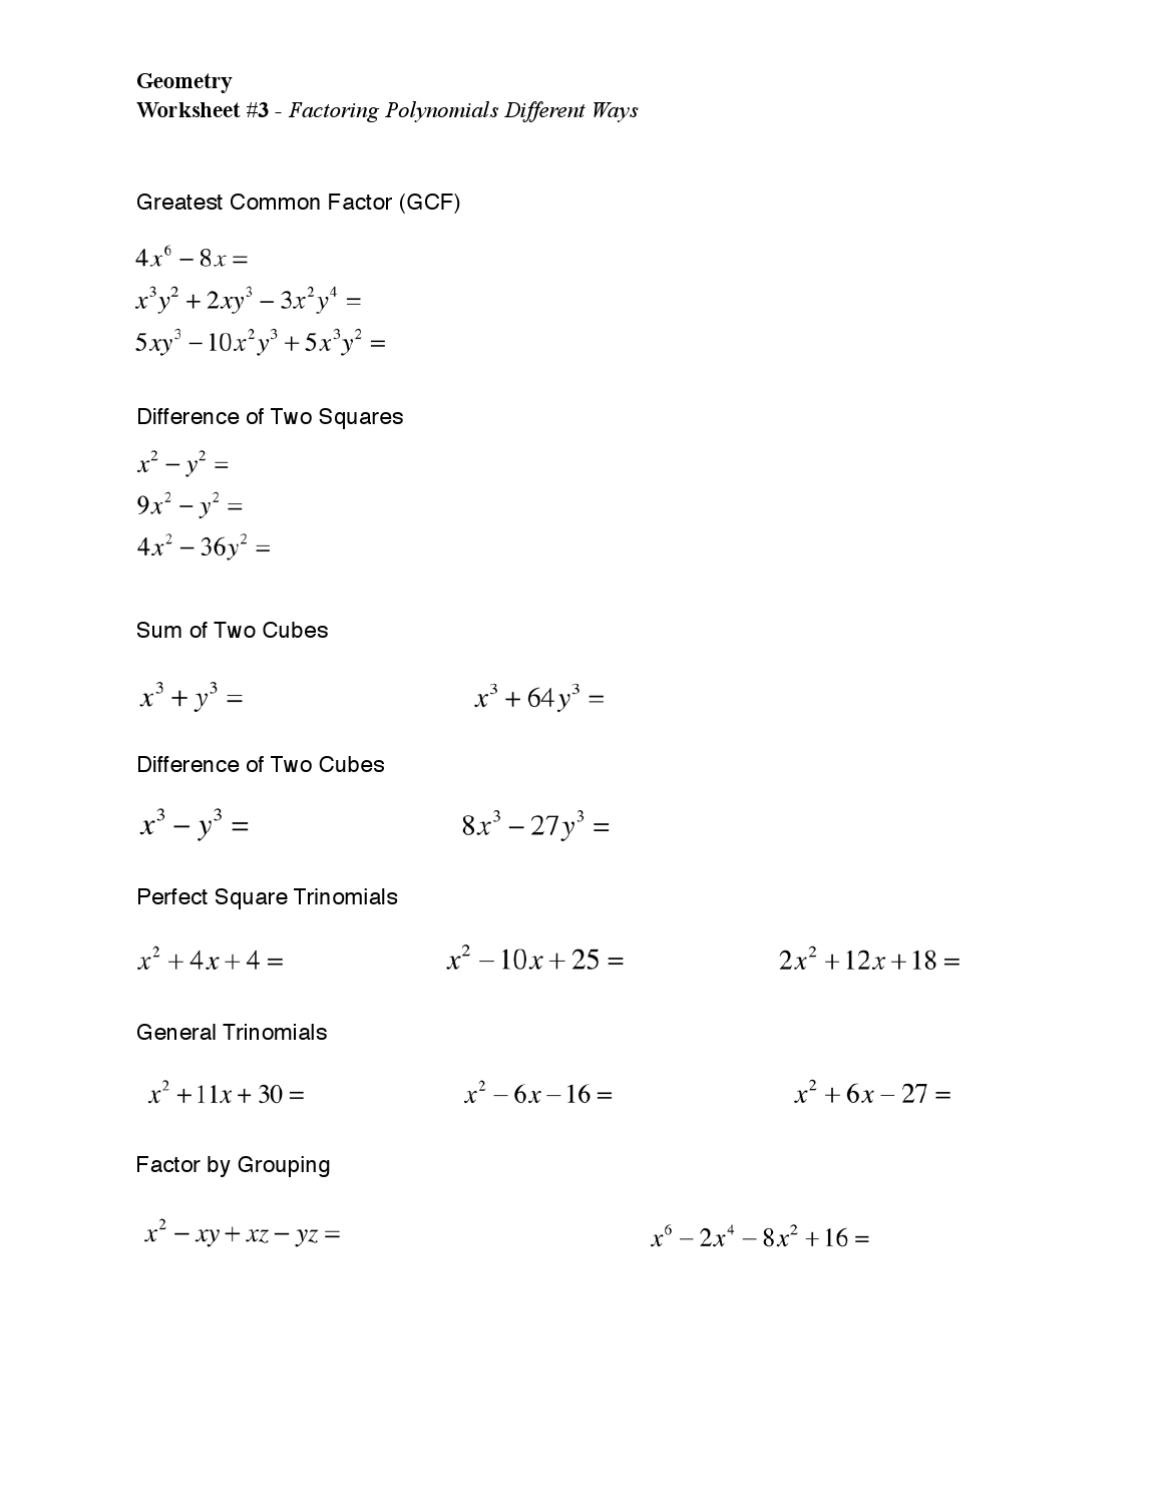 factoring-difference-of-squares-worksheet-answers-awesome-db-excel